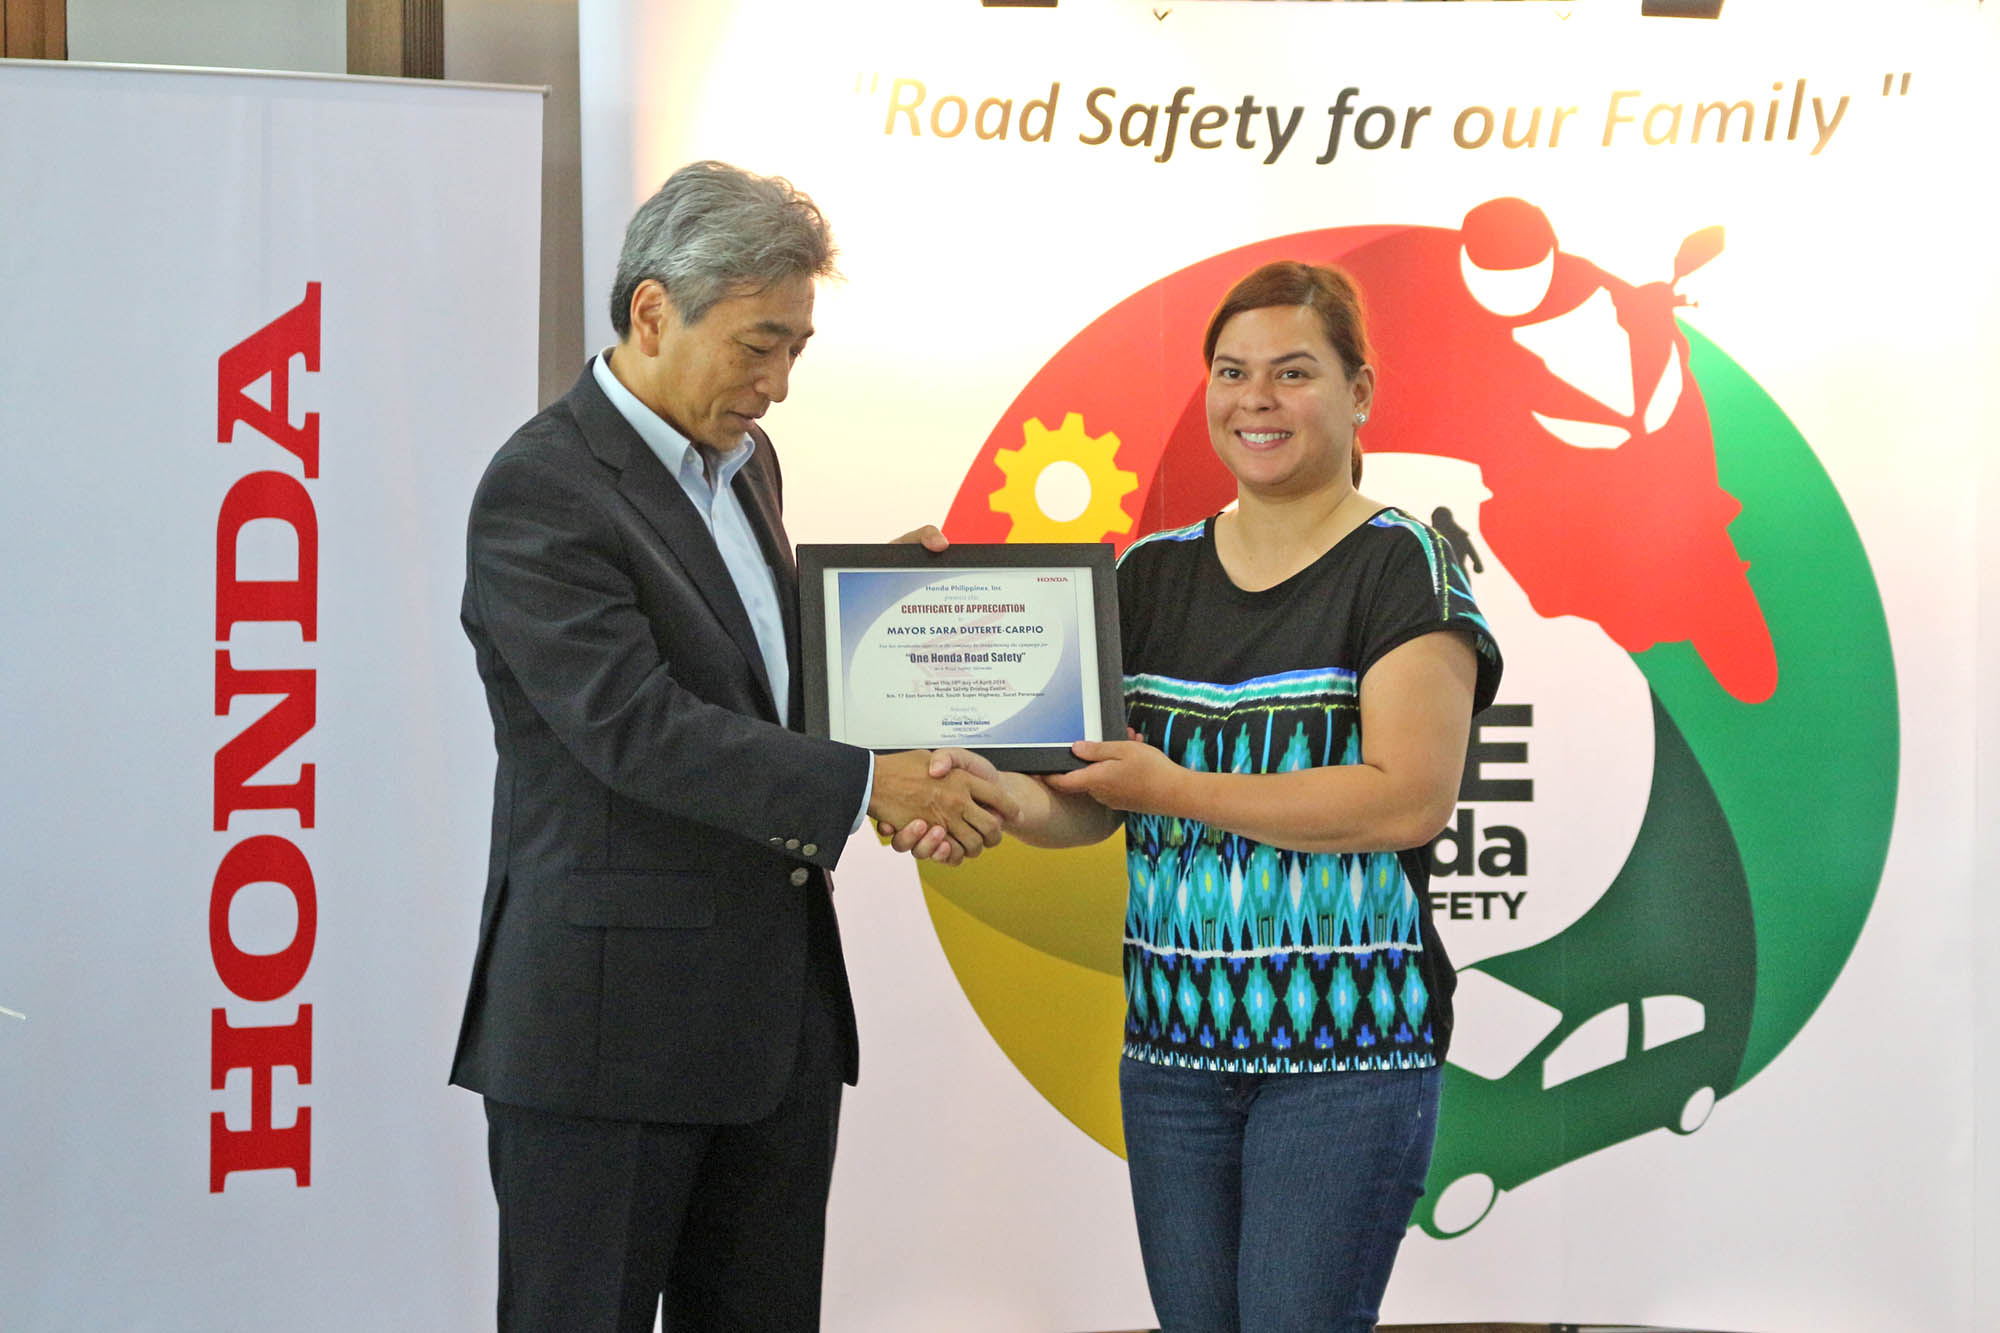 Sarah Duterte to hone motorcycle riding and safety skills at HSDC